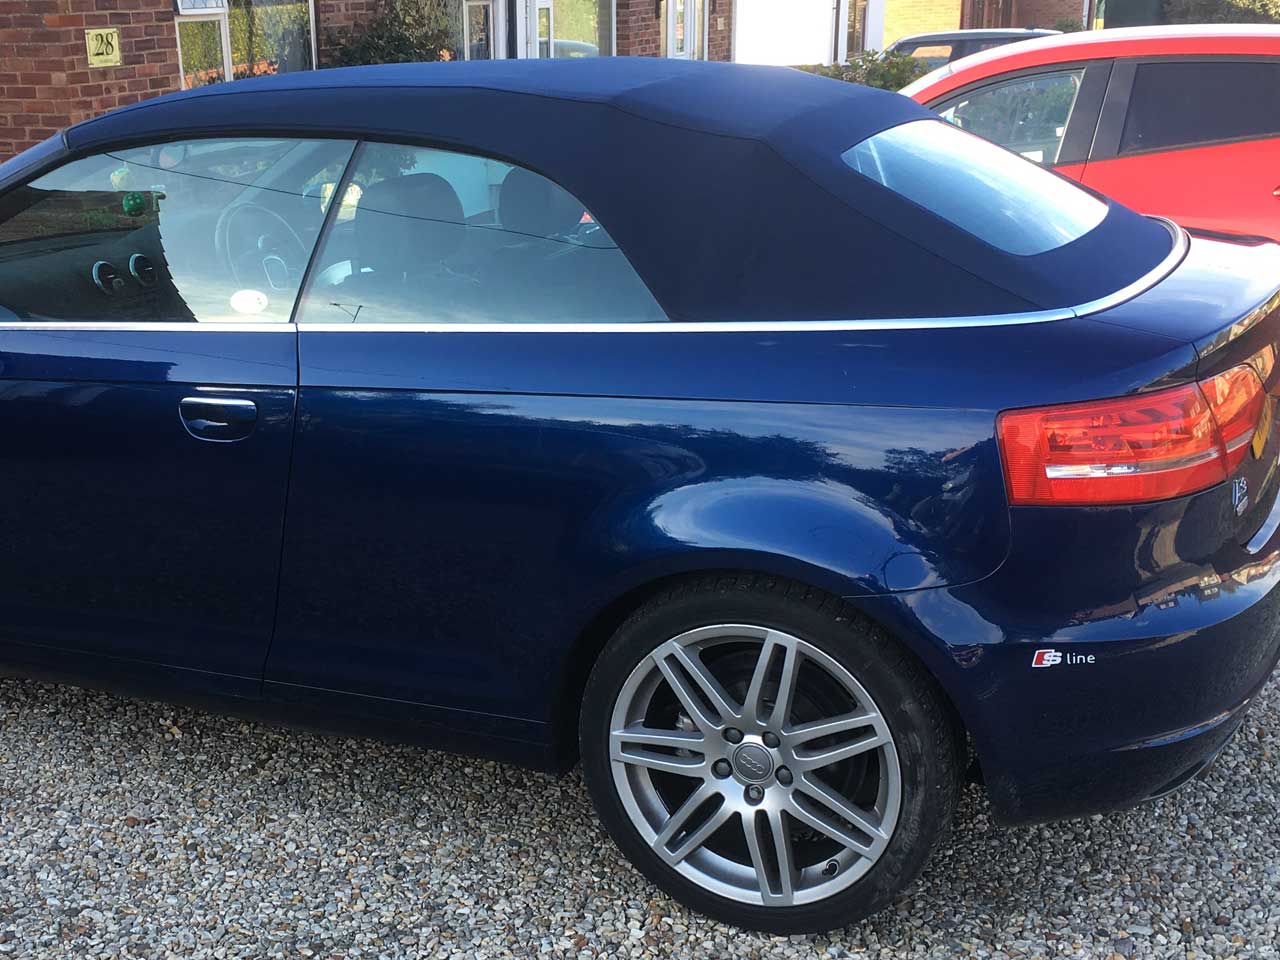 Soft Top Hood Replacement Audi A3